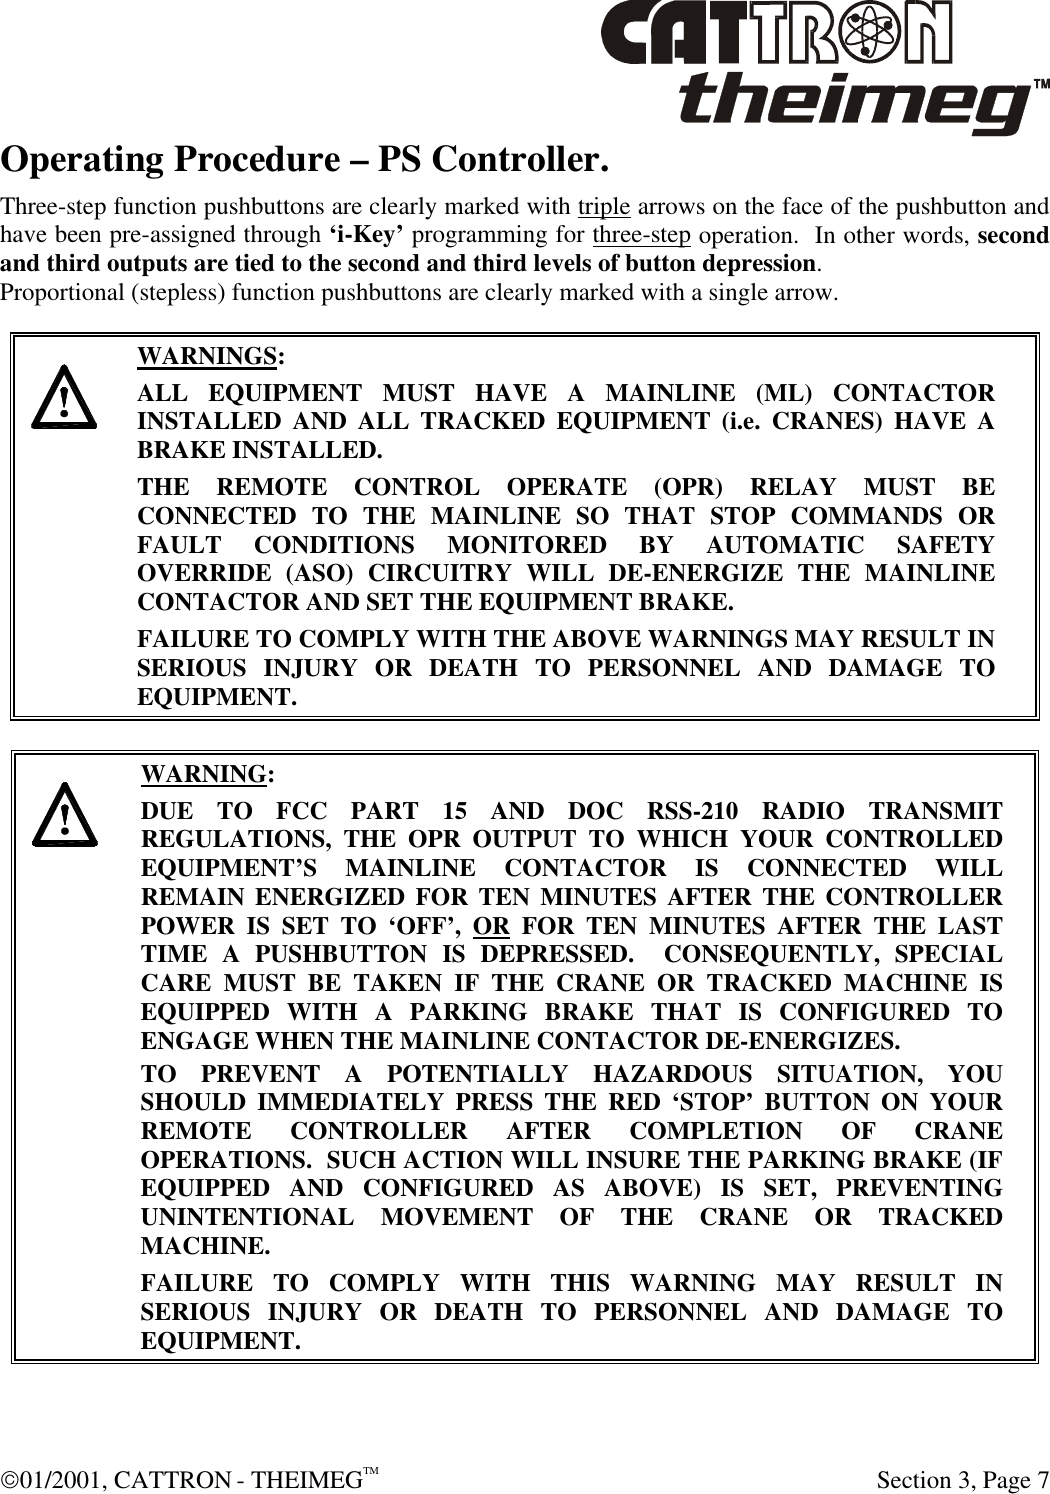  01/2001, CATTRON - THEIMEGTM  Section 3, Page 7 Operating Procedure – PS Controller. Three-step function pushbuttons are clearly marked with triple arrows on the face of the pushbutton and have been pre-assigned through ‘i-Key’ programming for three-step operation.  In other words, second and third outputs are tied to the second and third levels of button depression.   Proportional (stepless) function pushbuttons are clearly marked with a single arrow.      WARNINGS: ALL EQUIPMENT MUST HAVE A MAINLINE (ML) CONTACTOR INSTALLED AND ALL TRACKED EQUIPMENT (i.e. CRANES) HAVE A BRAKE INSTALLED. THE REMOTE CONTROL OPERATE (OPR) RELAY MUST BE CONNECTED TO THE MAINLINE SO THAT STOP COMMANDS OR FAULT CONDITIONS MONITORED BY AUTOMATIC SAFETY OVERRIDE (ASO) CIRCUITRY WILL DE-ENERGIZE THE MAINLINE CONTACTOR AND SET THE EQUIPMENT BRAKE.  FAILURE TO COMPLY WITH THE ABOVE WARNINGS MAY RESULT IN SERIOUS INJURY OR DEATH TO PERSONNEL AND DAMAGE TO EQUIPMENT.       WARNING: DUE TO FCC PART 15 AND DOC RSS-210 RADIO TRANSMIT REGULATIONS, THE OPR OUTPUT TO WHICH YOUR CONTROLLED EQUIPMENT’S MAINLINE CONTACTOR IS CONNECTED WILL REMAIN ENERGIZED FOR TEN MINUTES AFTER THE CONTROLLER POWER IS SET TO ‘OFF’, OR FOR TEN MINUTES AFTER THE LAST TIME A PUSHBUTTON IS DEPRESSED.  CONSEQUENTLY, SPECIAL CARE MUST BE TAKEN IF THE CRANE OR TRACKED MACHINE IS EQUIPPED WITH A PARKING BRAKE THAT IS CONFIGURED TO ENGAGE WHEN THE MAINLINE CONTACTOR DE-ENERGIZES.    TO PREVENT A POTENTIALLY HAZARDOUS SITUATION, YOU SHOULD IMMEDIATELY PRESS THE RED ‘STOP’ BUTTON ON YOUR REMOTE CONTROLLER AFTER COMPLETION OF CRANE OPERATIONS.  SUCH ACTION WILL INSURE THE PARKING BRAKE (IF EQUIPPED AND CONFIGURED AS ABOVE) IS SET, PREVENTING UNINTENTIONAL MOVEMENT OF THE CRANE OR TRACKED MACHINE. FAILURE TO COMPLY WITH THIS WARNING MAY RESULT IN SERIOUS INJURY OR DEATH TO PERSONNEL AND DAMAGE TO EQUIPMENT.   